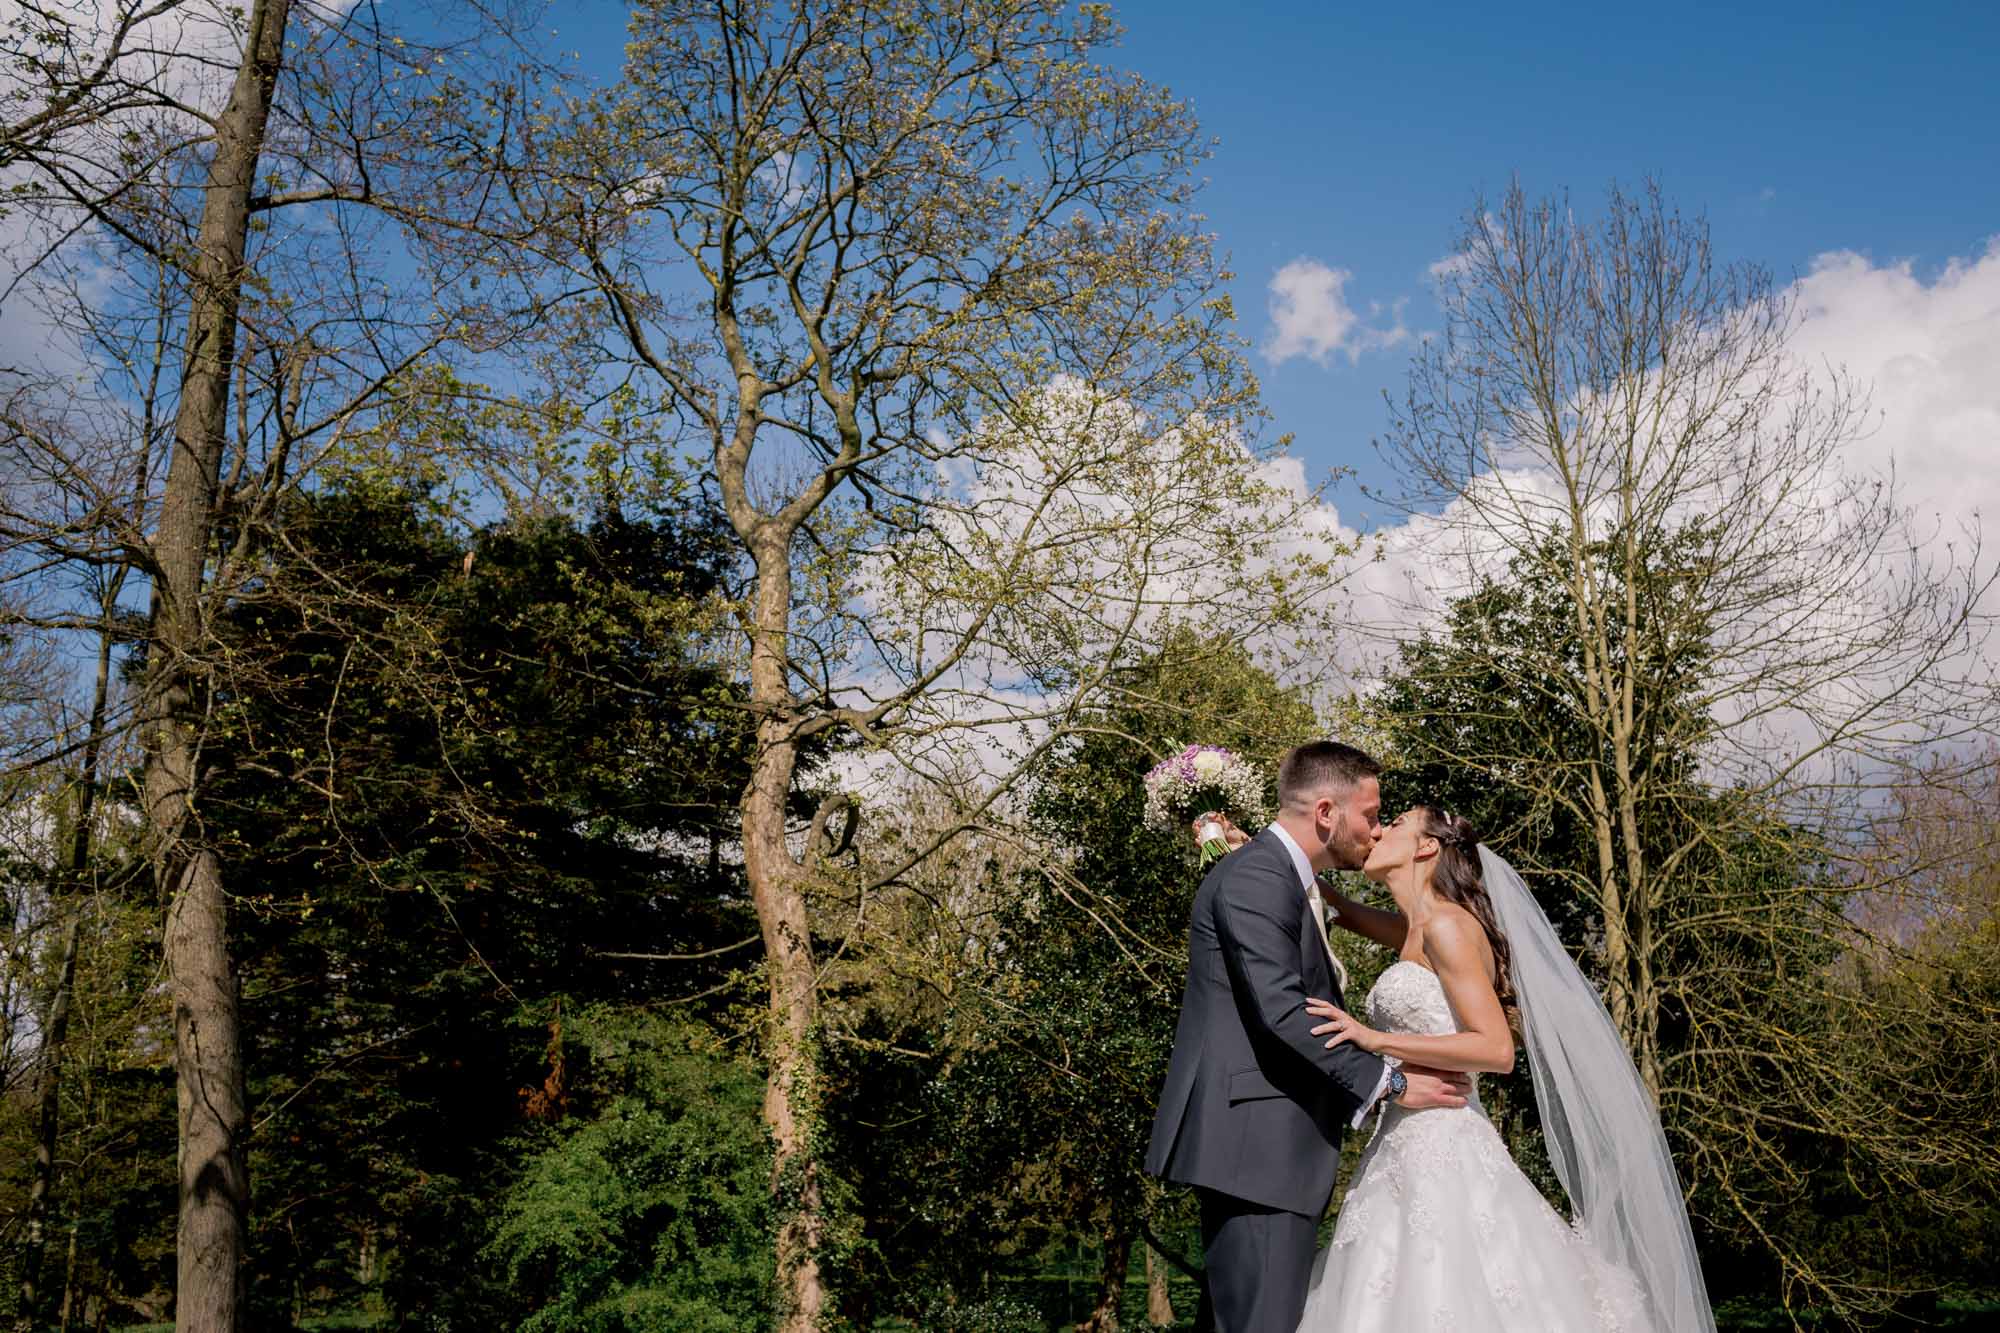 Bride and groom kiss on their wedding day at Great Fosters.